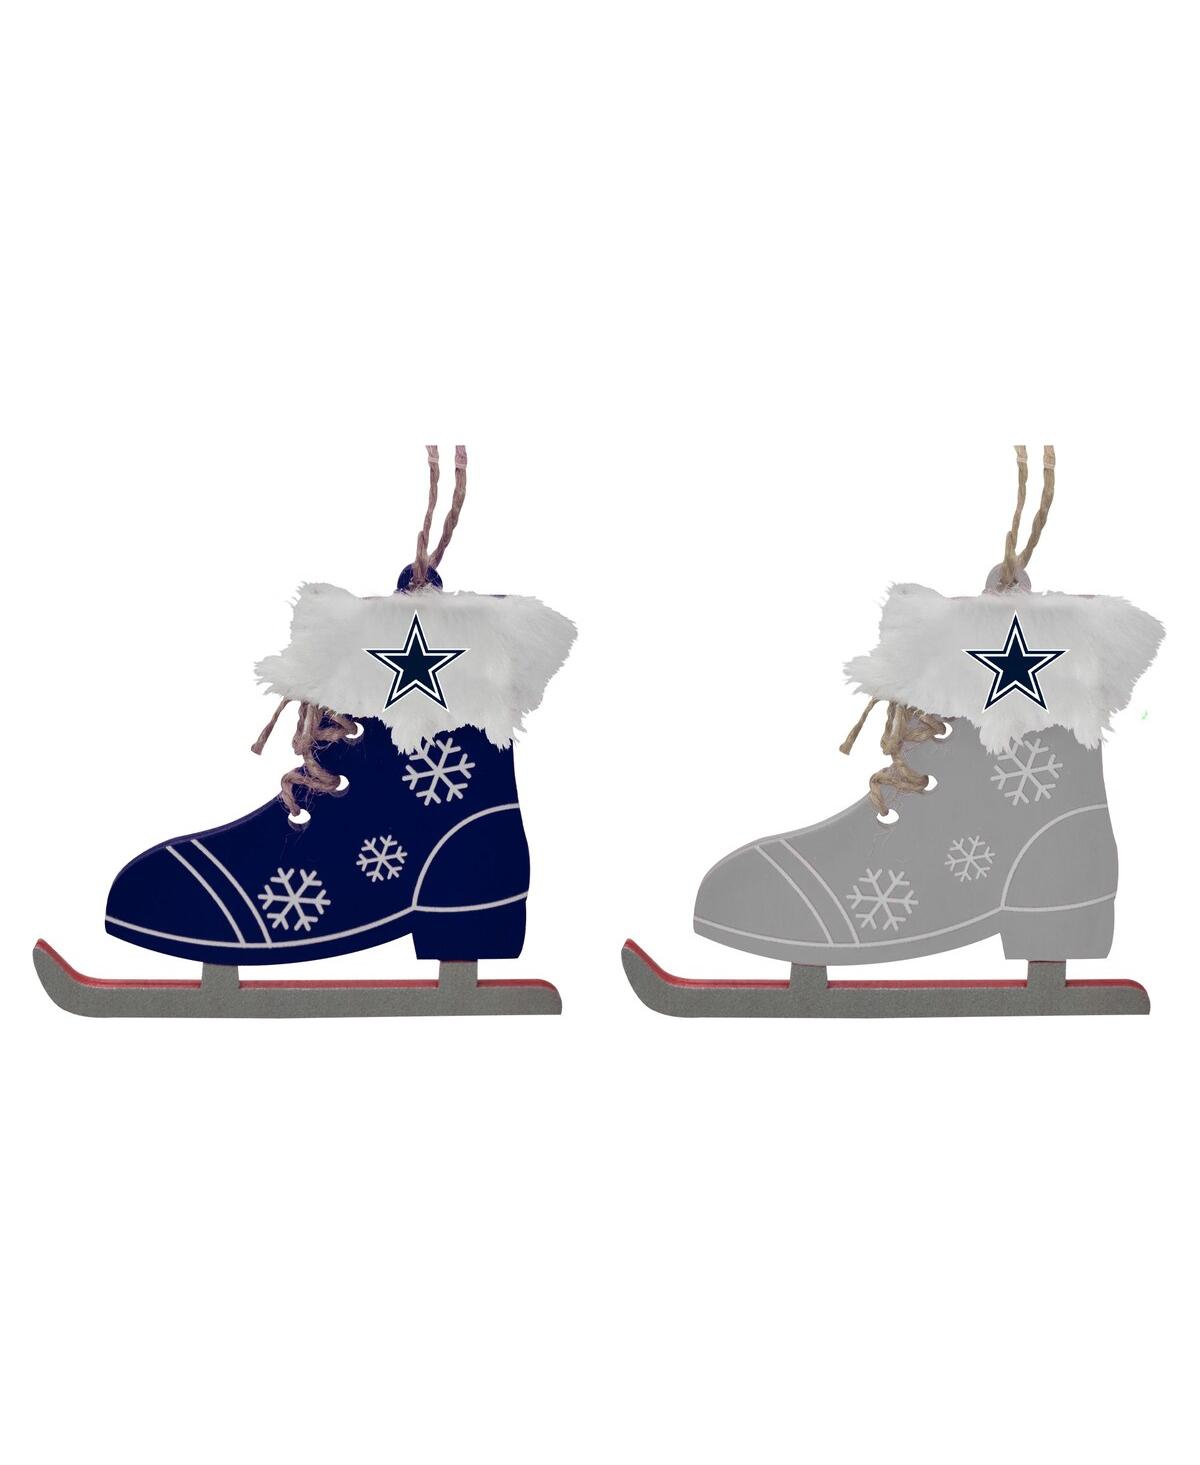 The Memory Company Dallas Cowboys Two-Pack Ice Skate Ornament Set - Blue, Gray